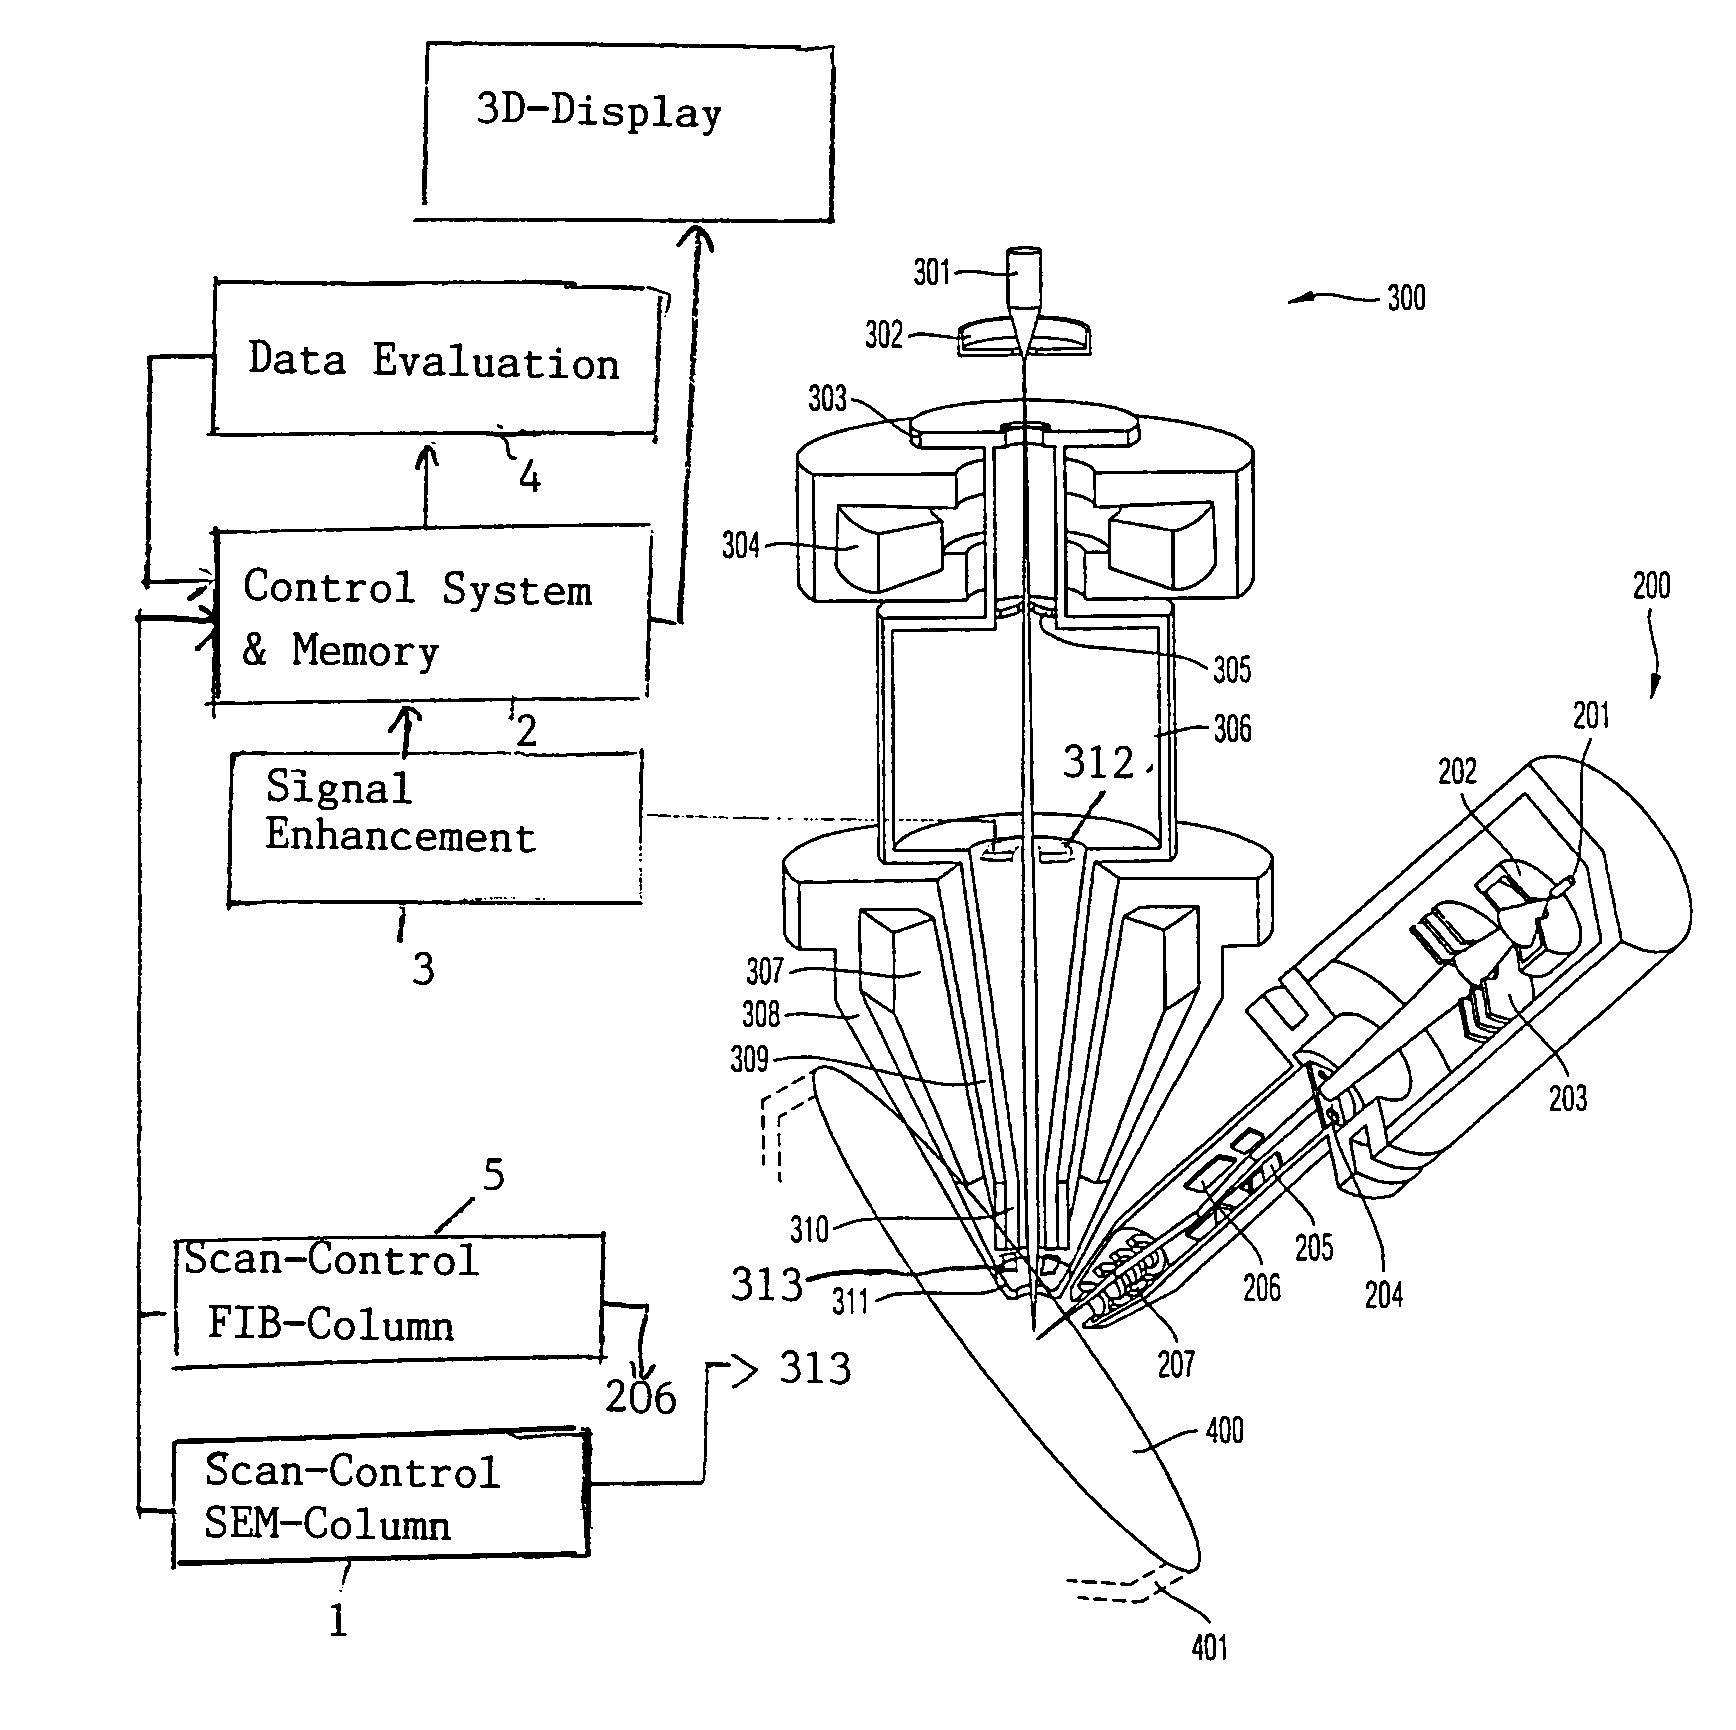 Method and apparatus for quantitative three-dimensional reconstruction in scanning electron microscopy